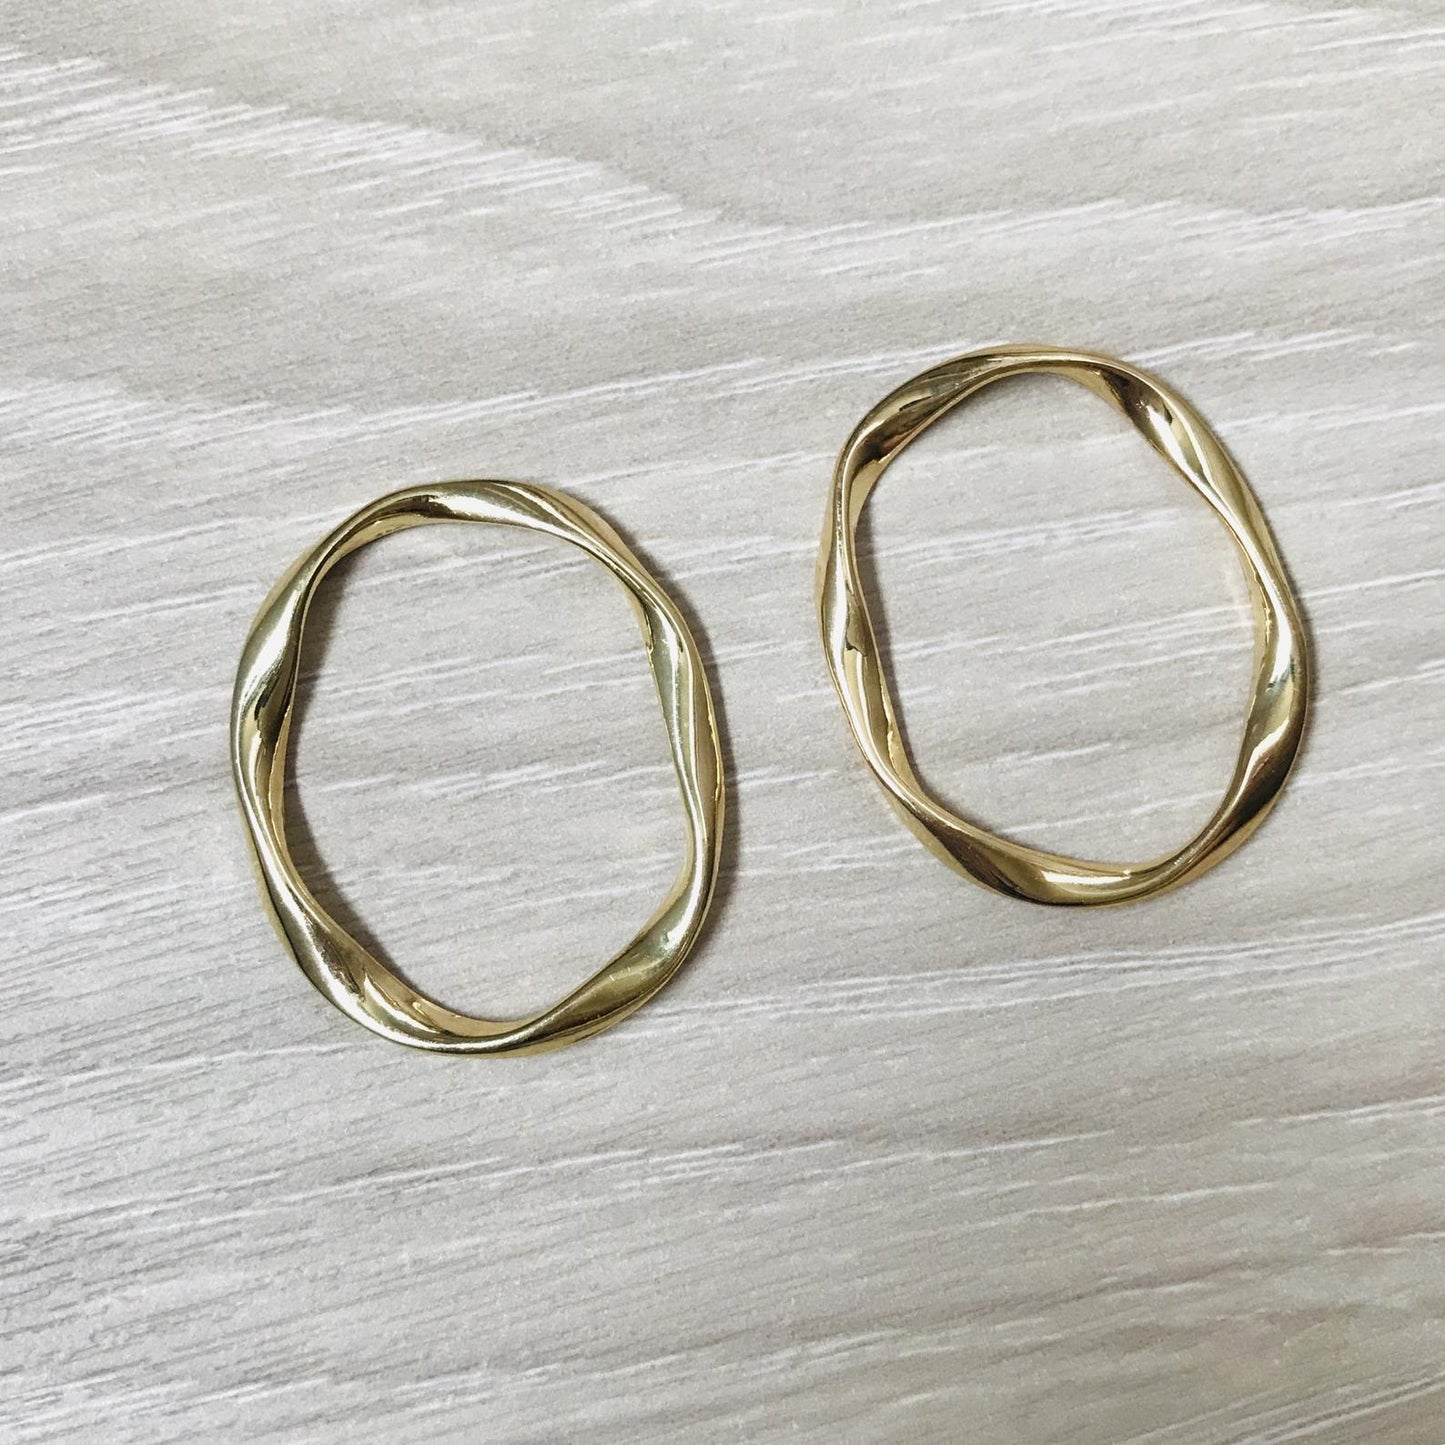 4 Gold Oval Circle Geometric charm Earring Finding